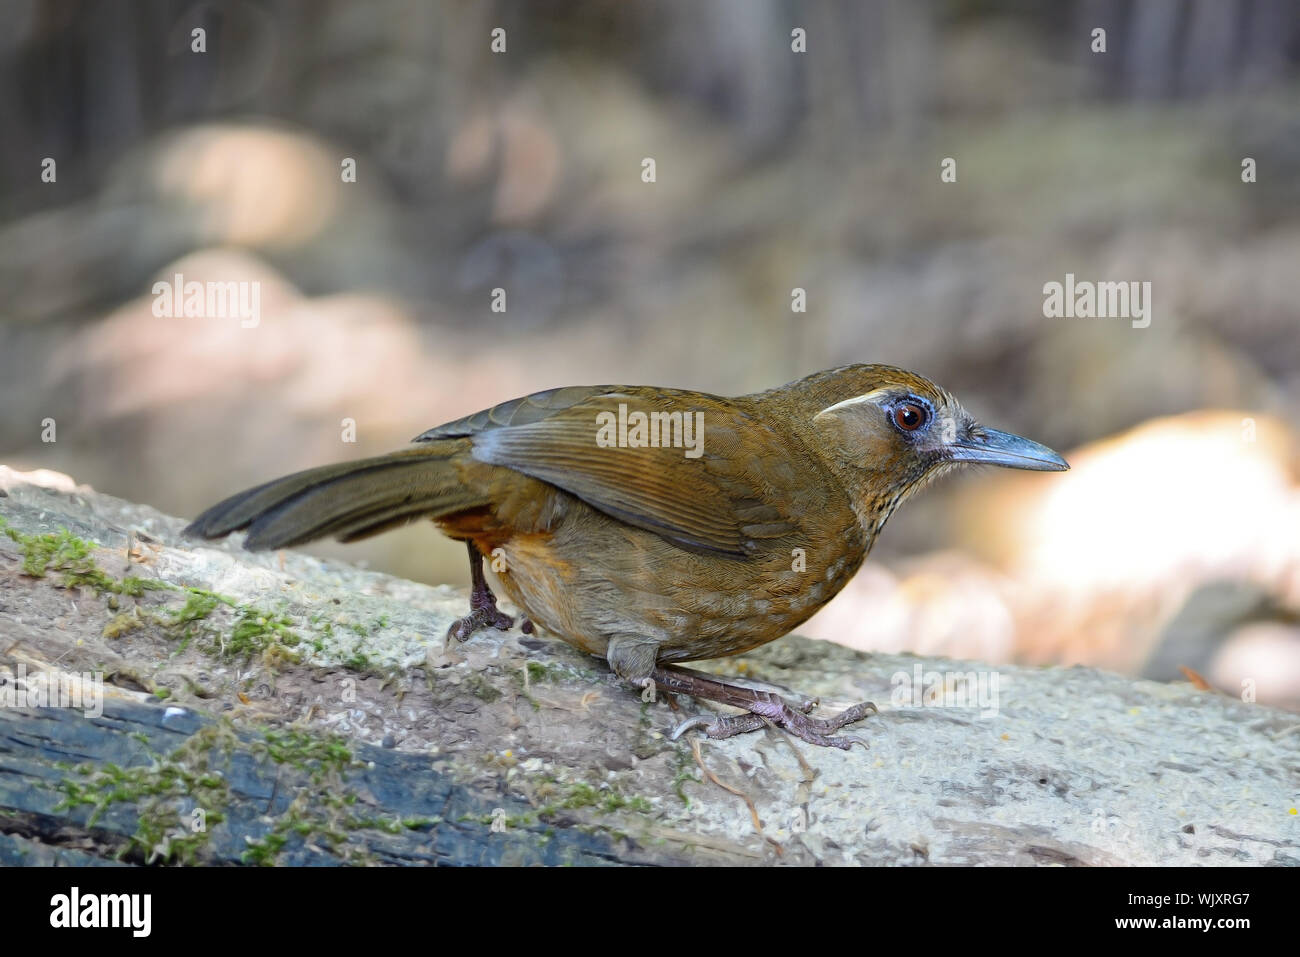 Spot-breasted Laughingthrush (Stactocichia merulina), uncommon species of Laughingthrush bird, back profile, taken in Thailand Stock Photo